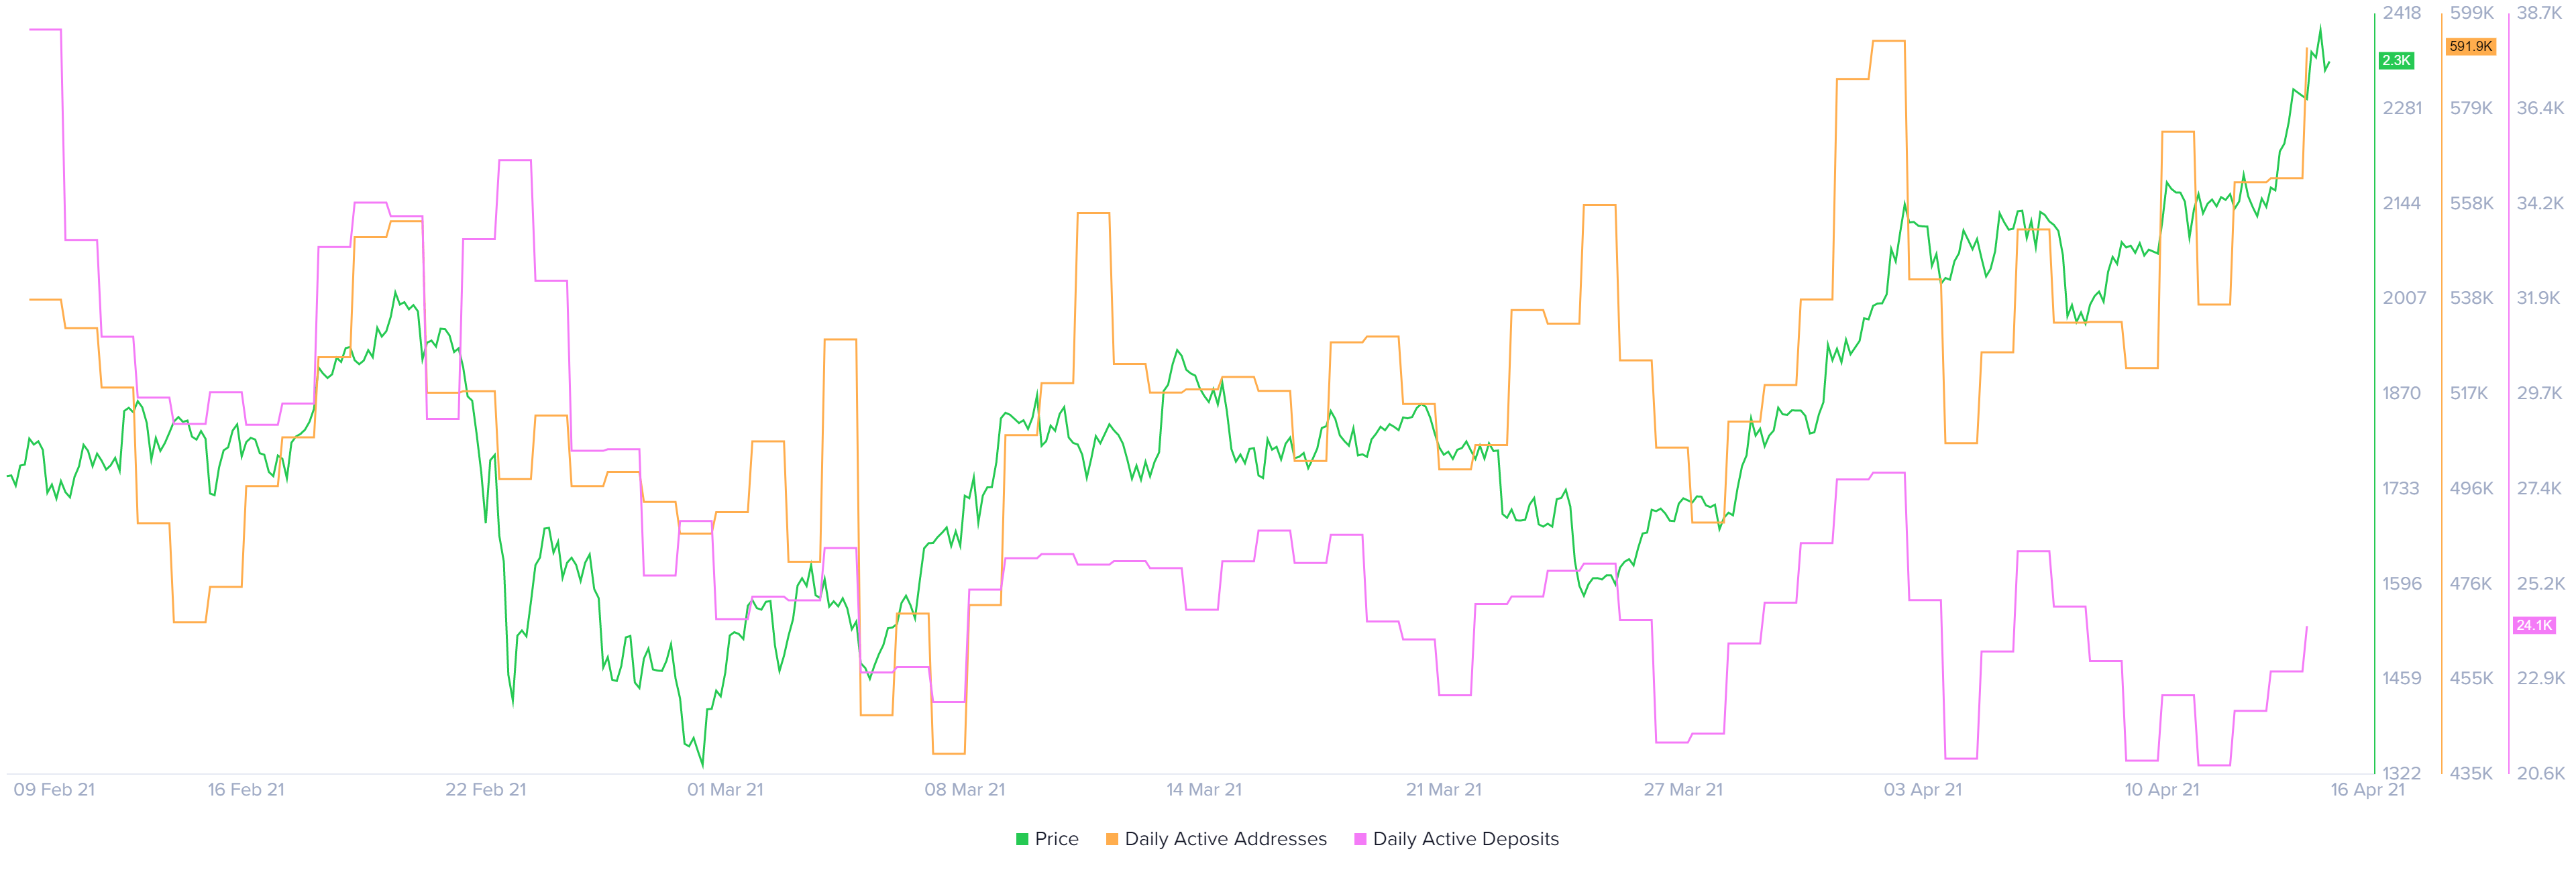 Ethereum daily active addresses and deposits chart